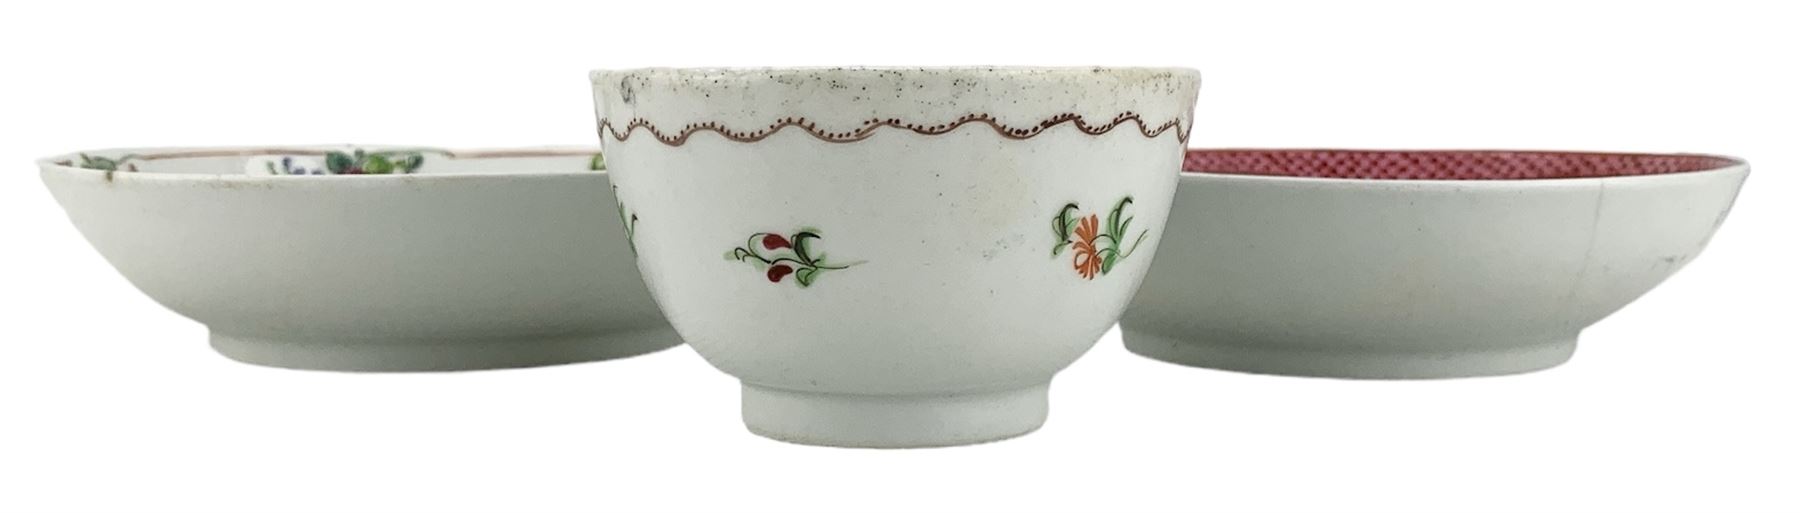 Early Worcester slop bowl decorated in the three flowers pattern c1780 - Image 5 of 9